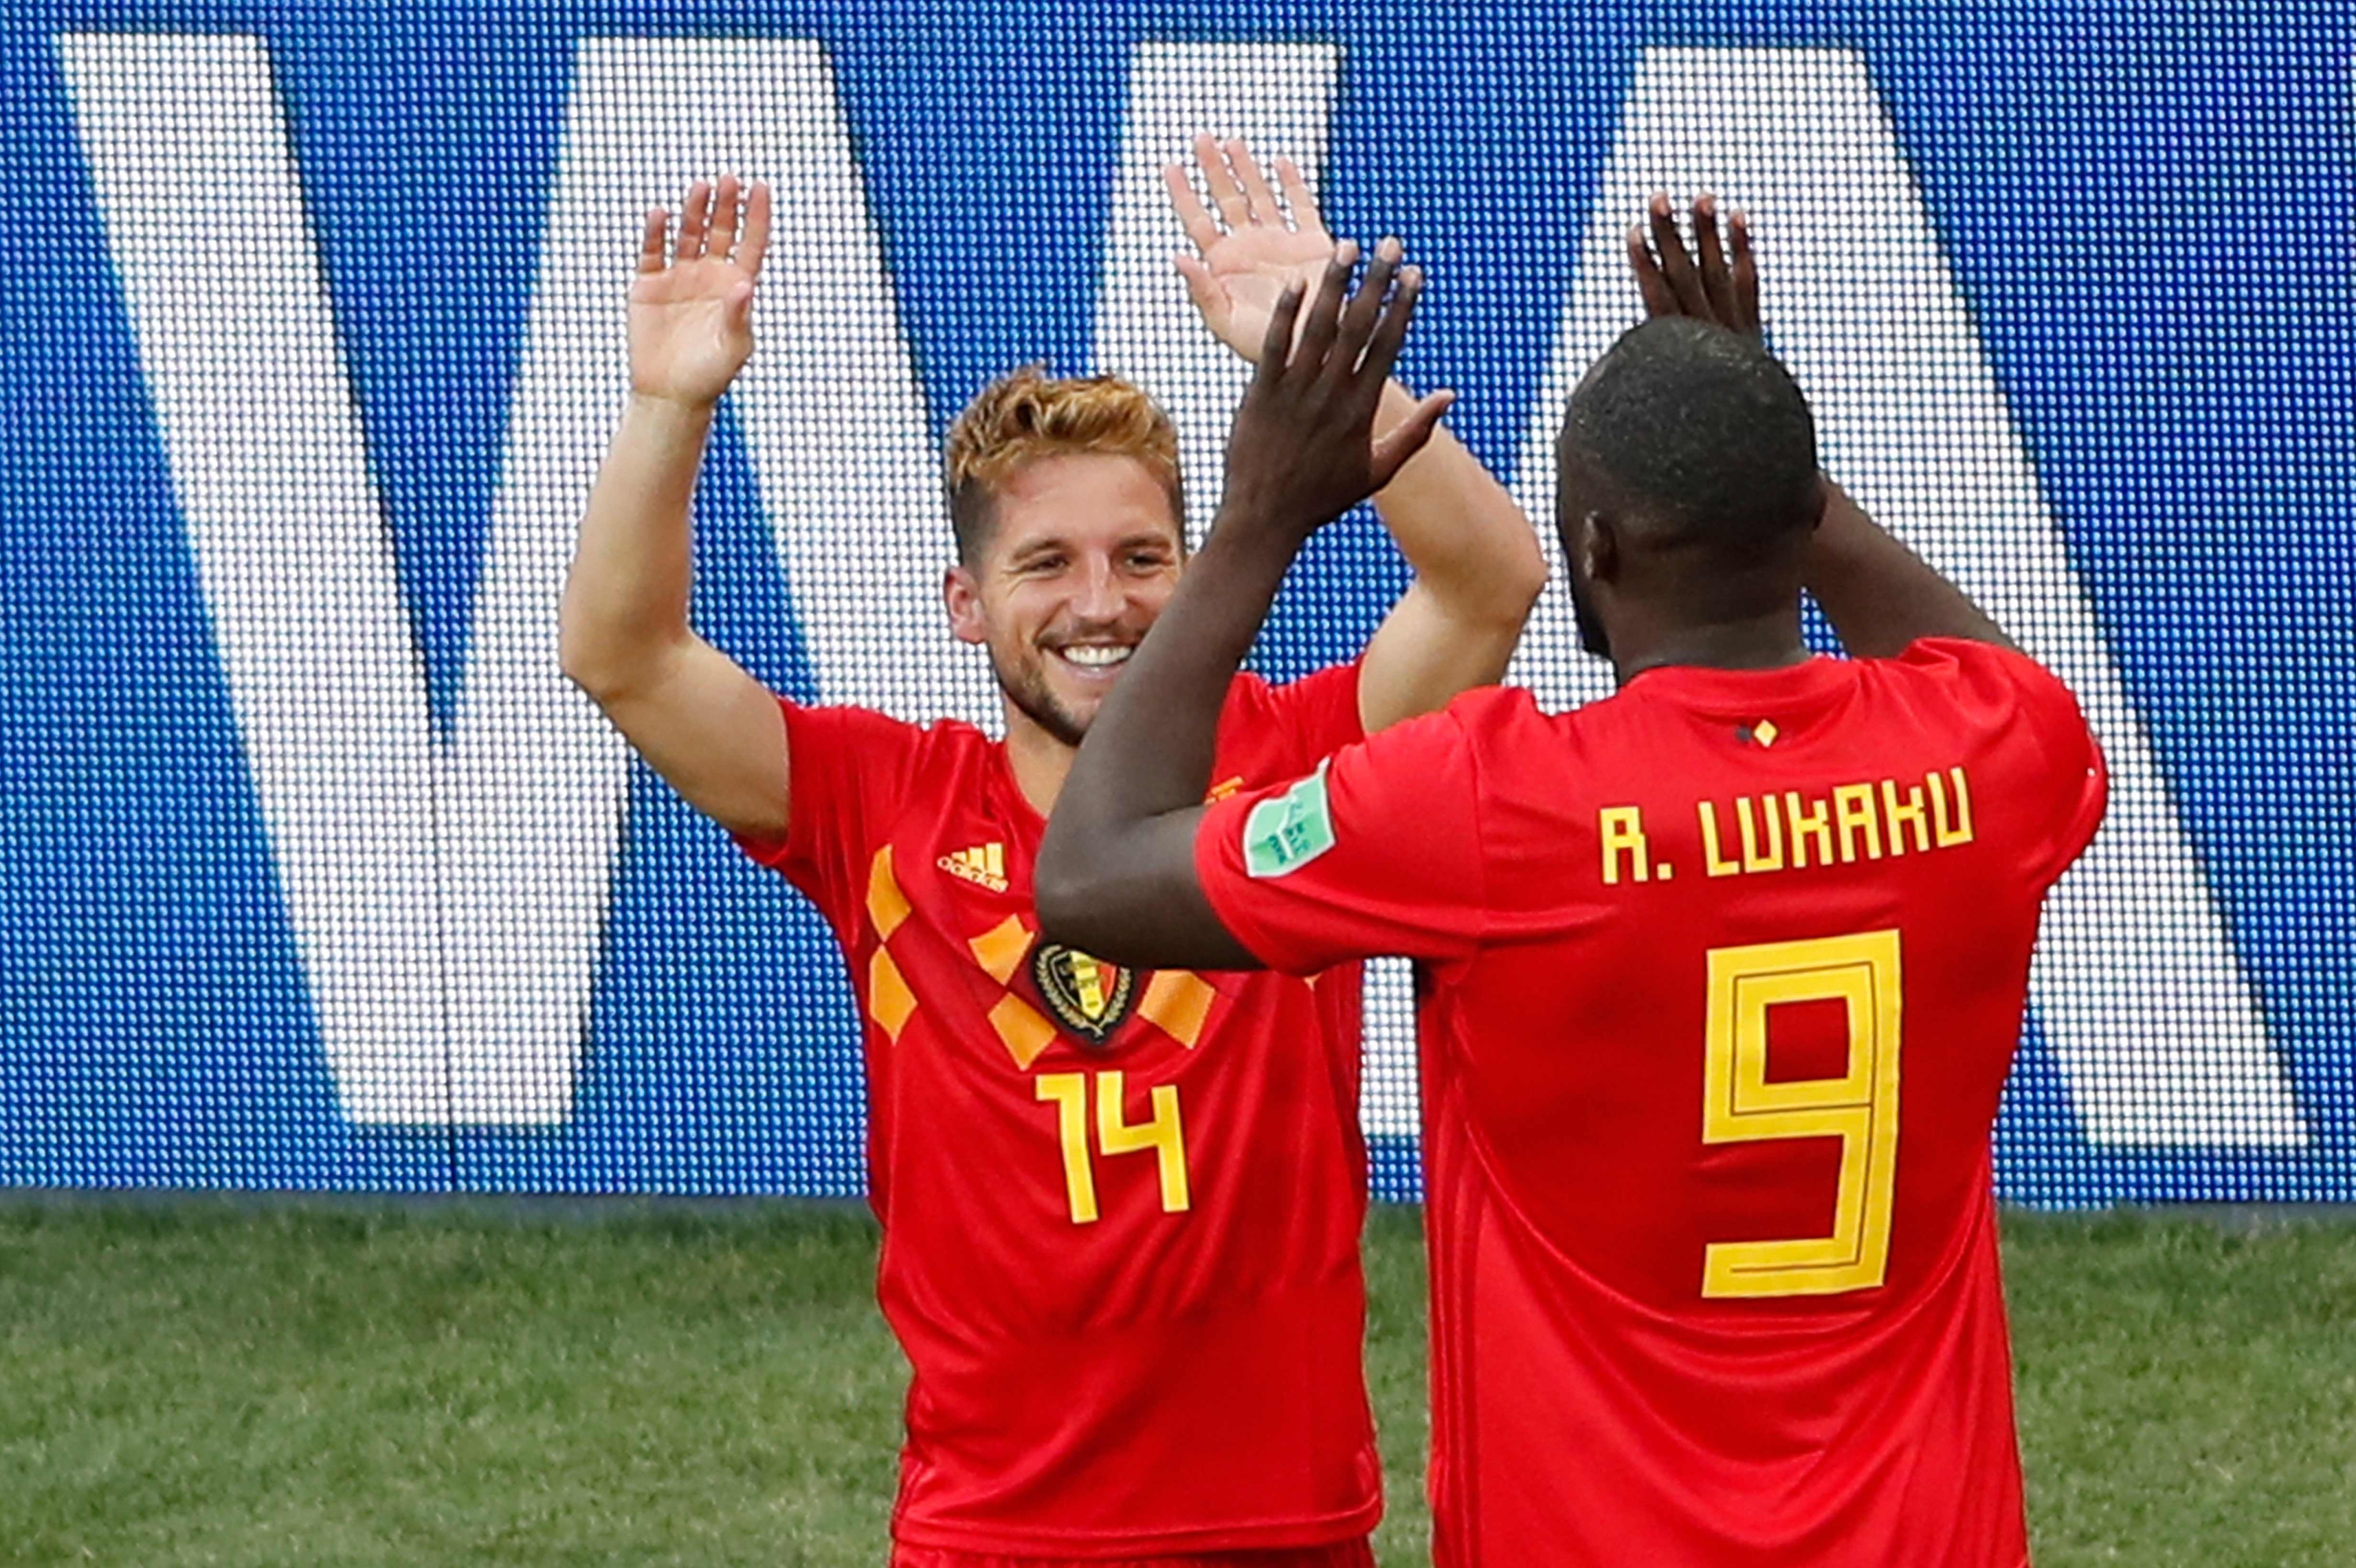 Belgium's forward Dries Mertens (L) is congratulated by Belgium's forward Romelu Lukaku after scoring a goal during the Russia 2018 World Cup Group G football match between Belgium and Panama at the Fisht Stadium in Sochi on June 18, 2018. / AFP PHOTO / Odd ANDERSEN / RESTRICTED TO EDITORIAL USE - NO MOBILE PUSH ALERTS/DOWNLOADS